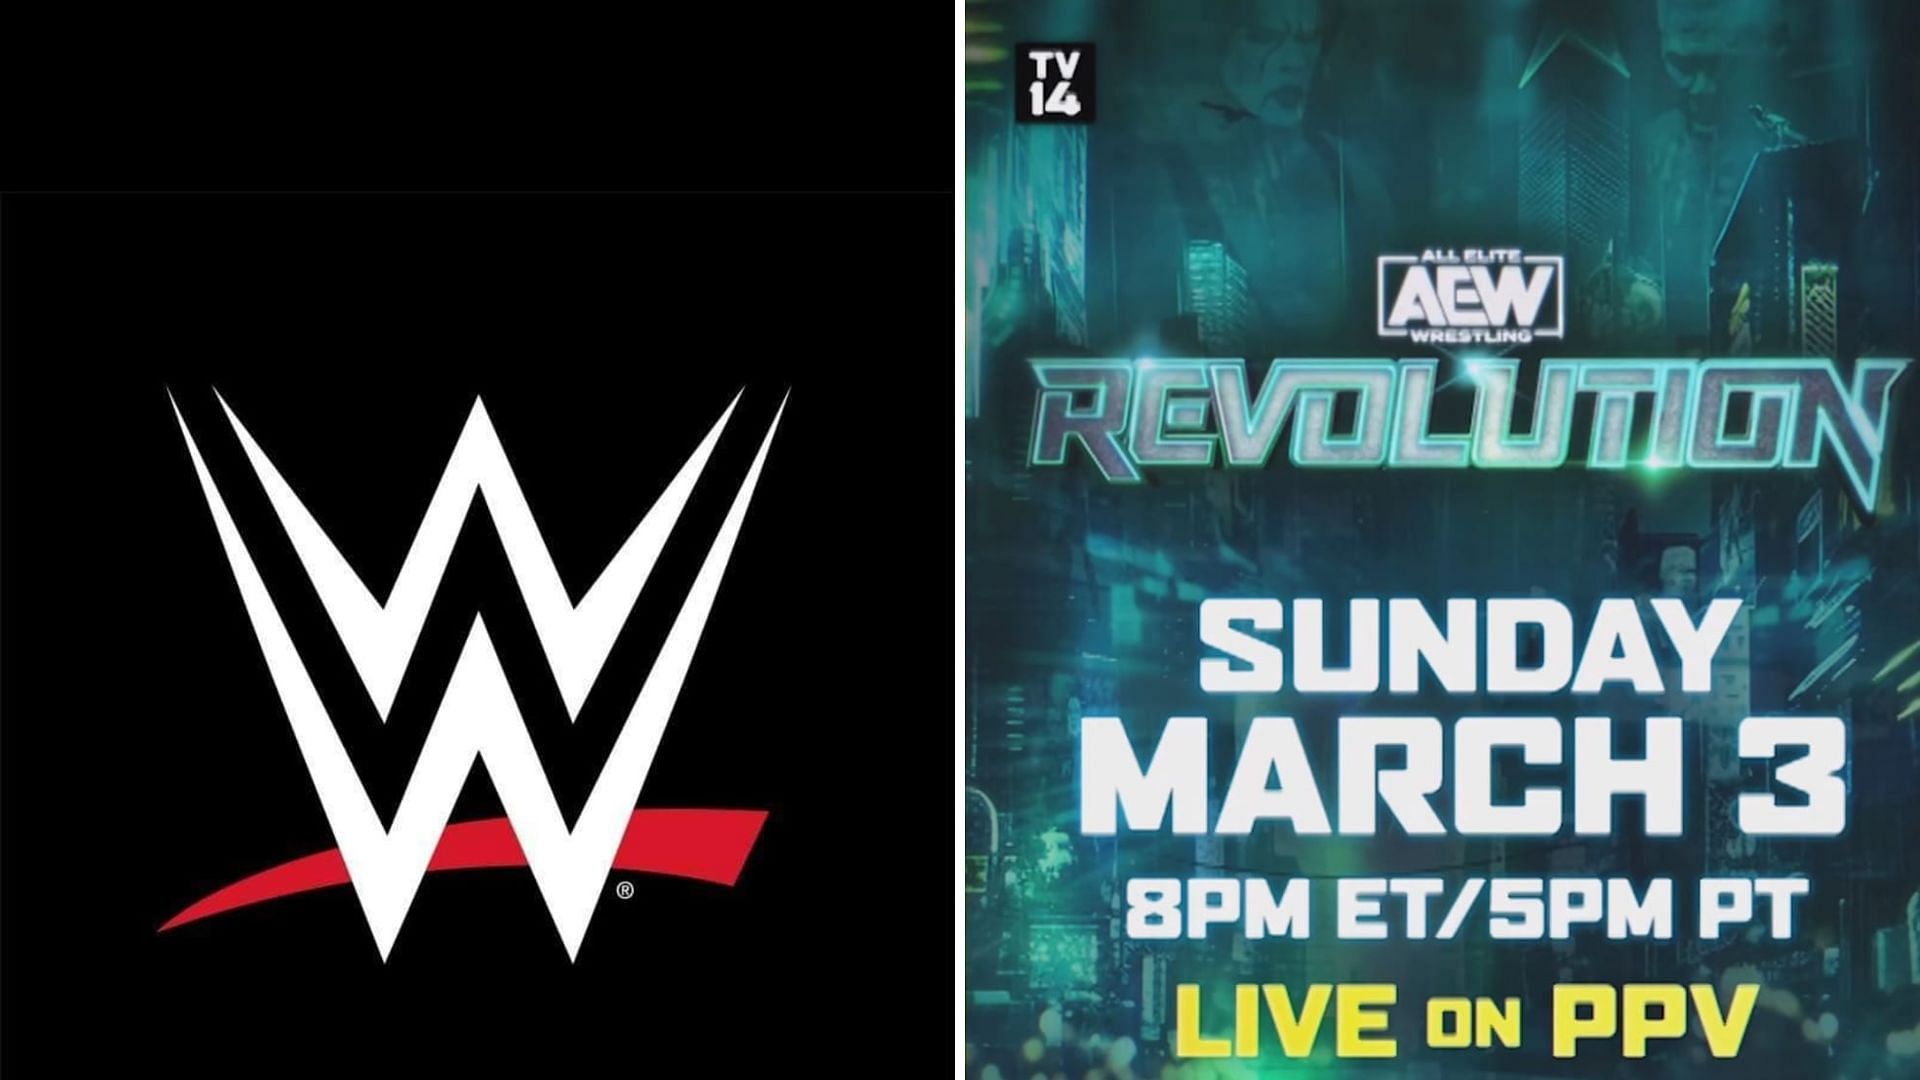 AEW Revolution is sure to be a memorable night of action.